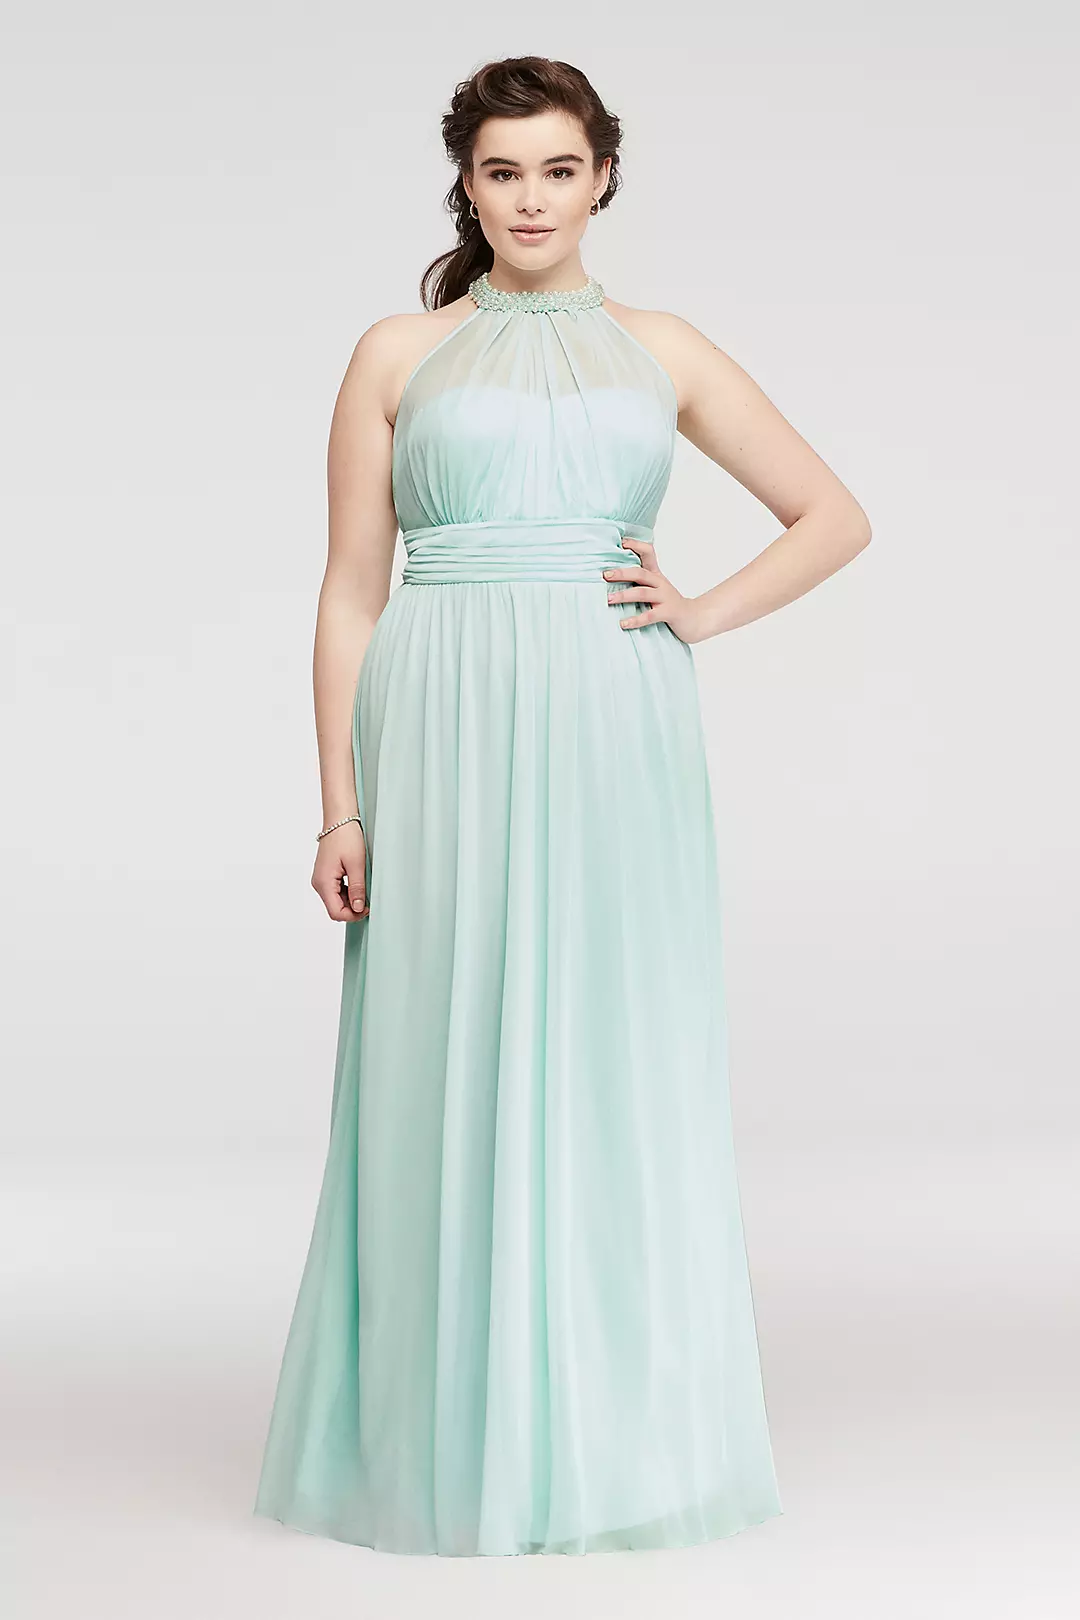 Beaded Illusion Halter Ruched Prom Dress  Image